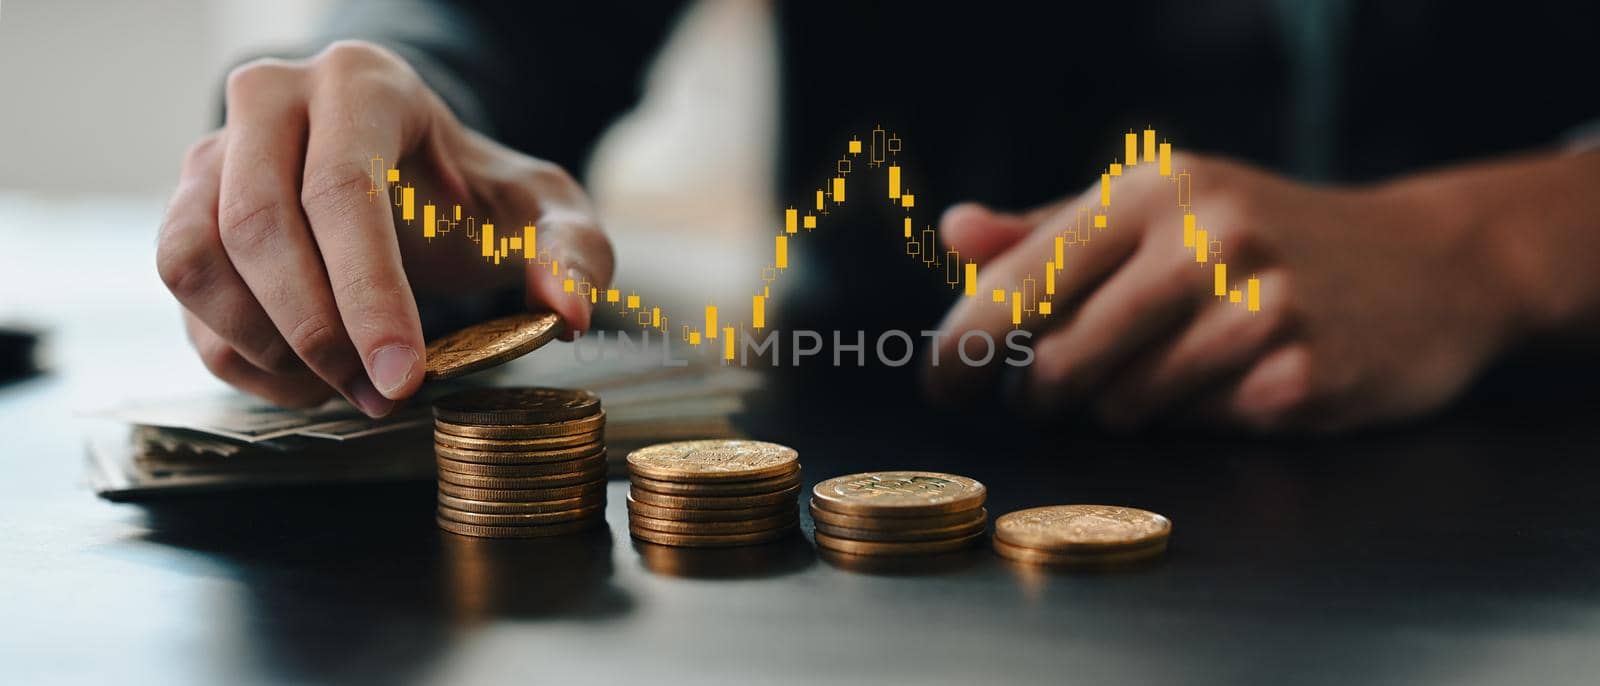 Stock market, business growth and strategy concept. Businessman holding gold coin with virtual screen of stock market changes.